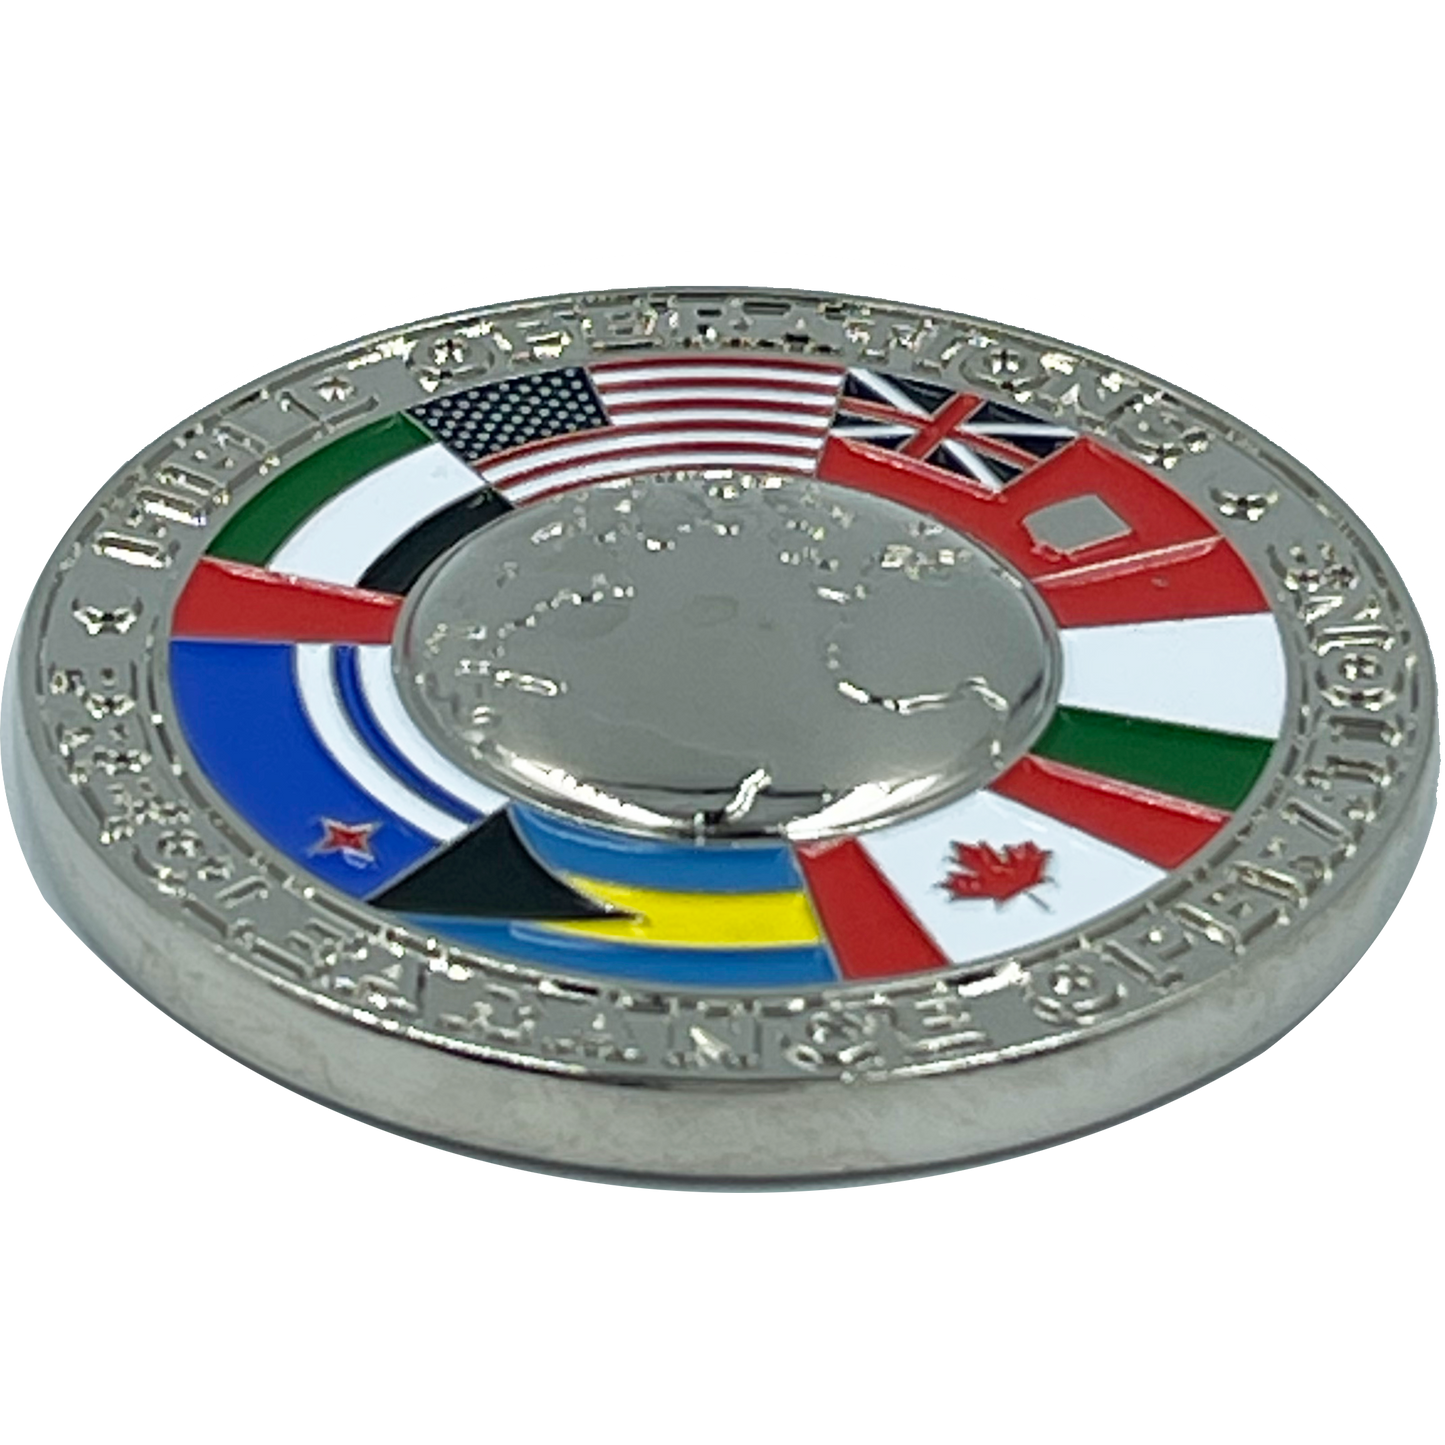 EL2-002 CBP Preclearance Canada Police Field Operations CBPO CBP Officer Field Ops Challenge Coin